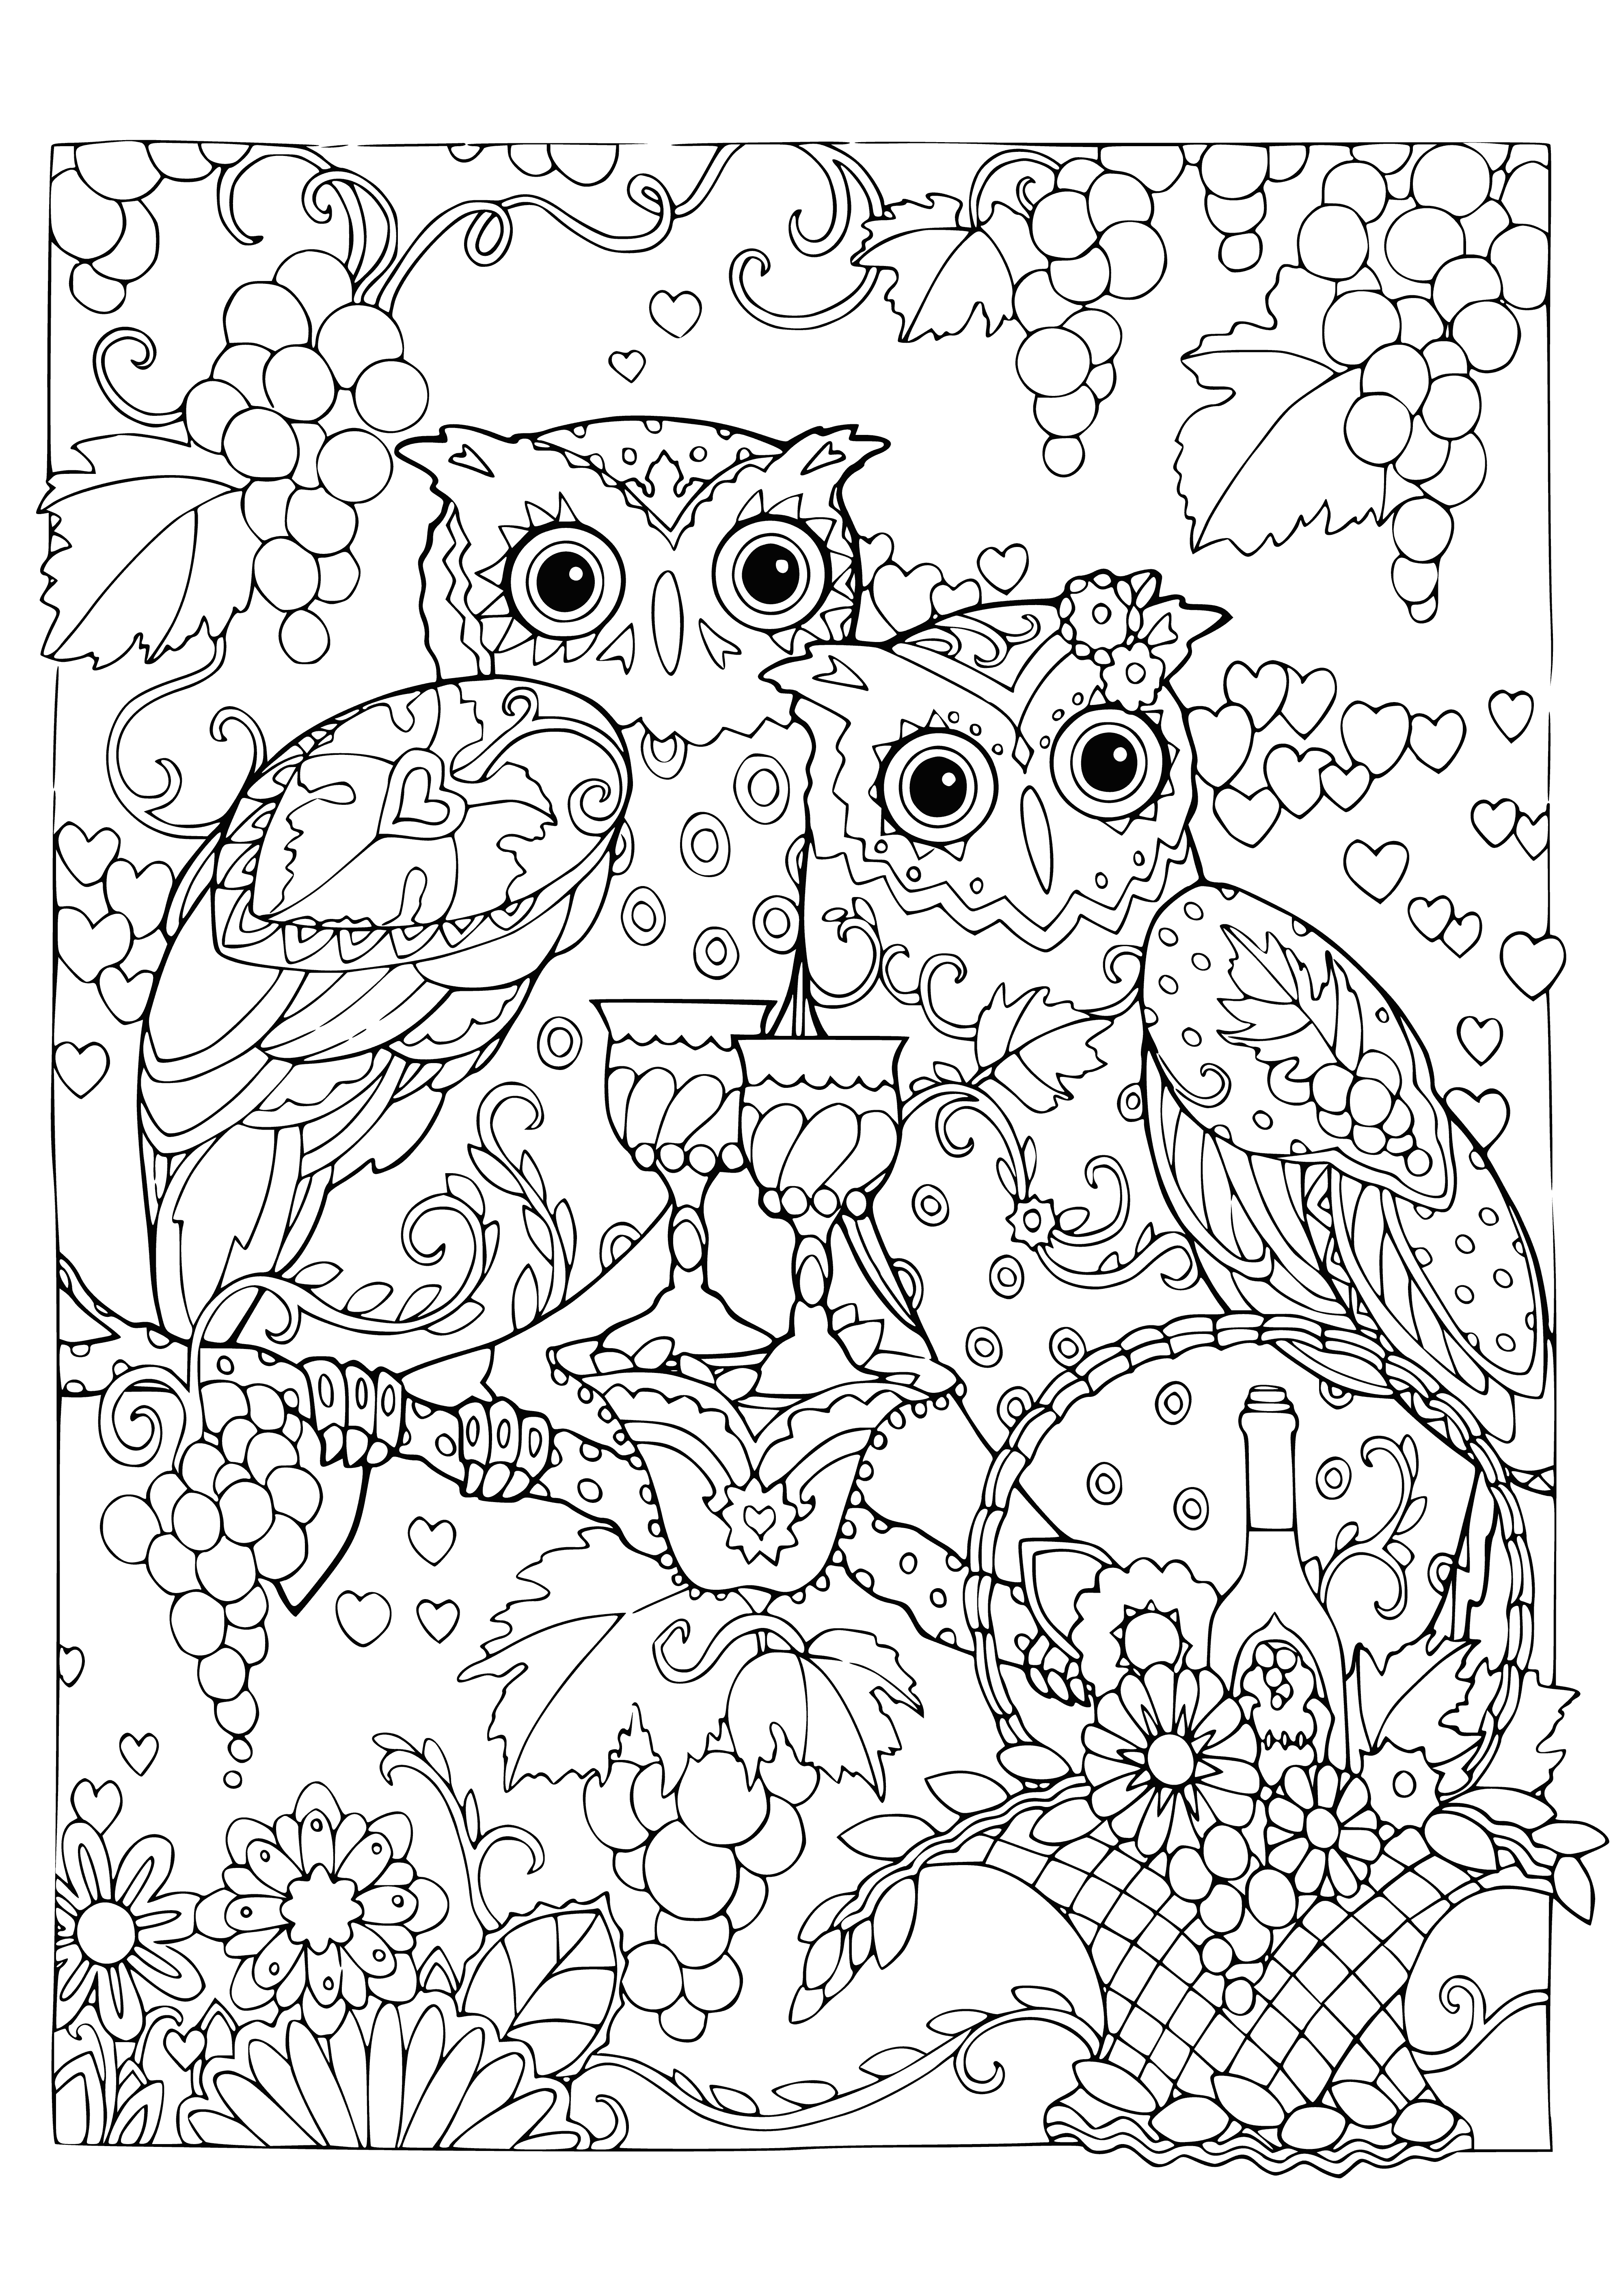 Feast coloring page